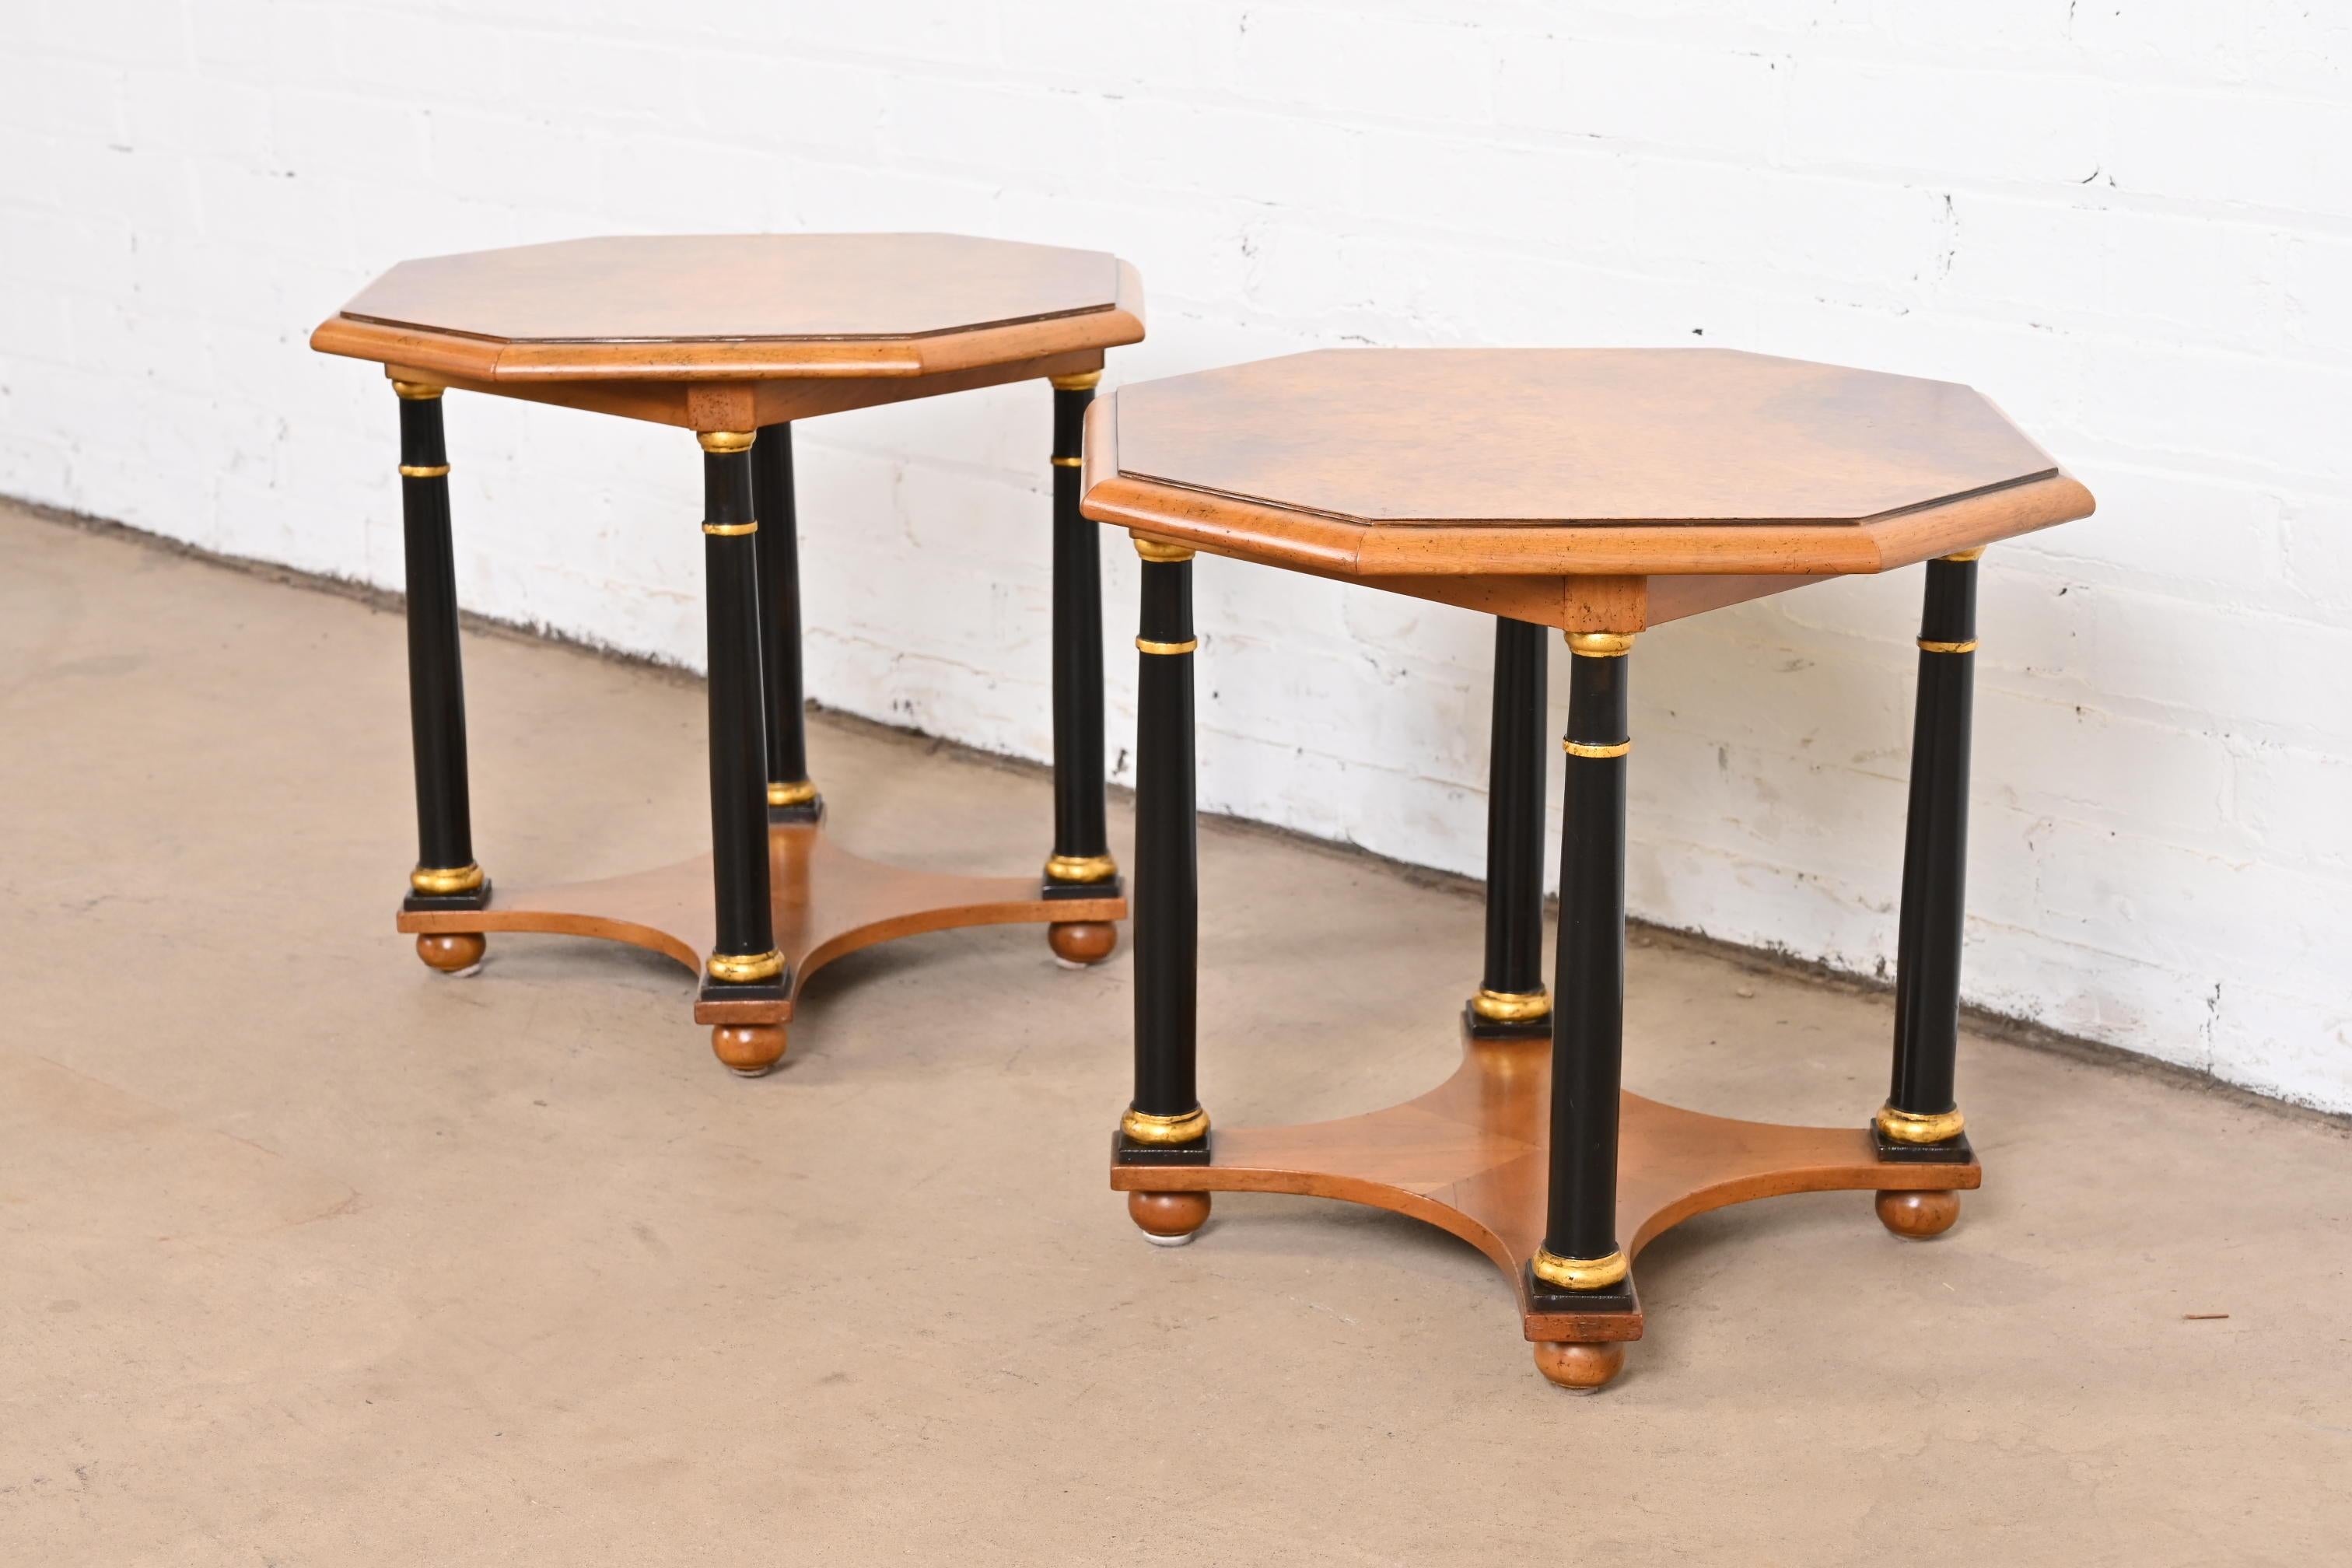 Mid-20th Century Baker Furniture Neoclassical Burled Walnut Tea Tables, Pair For Sale